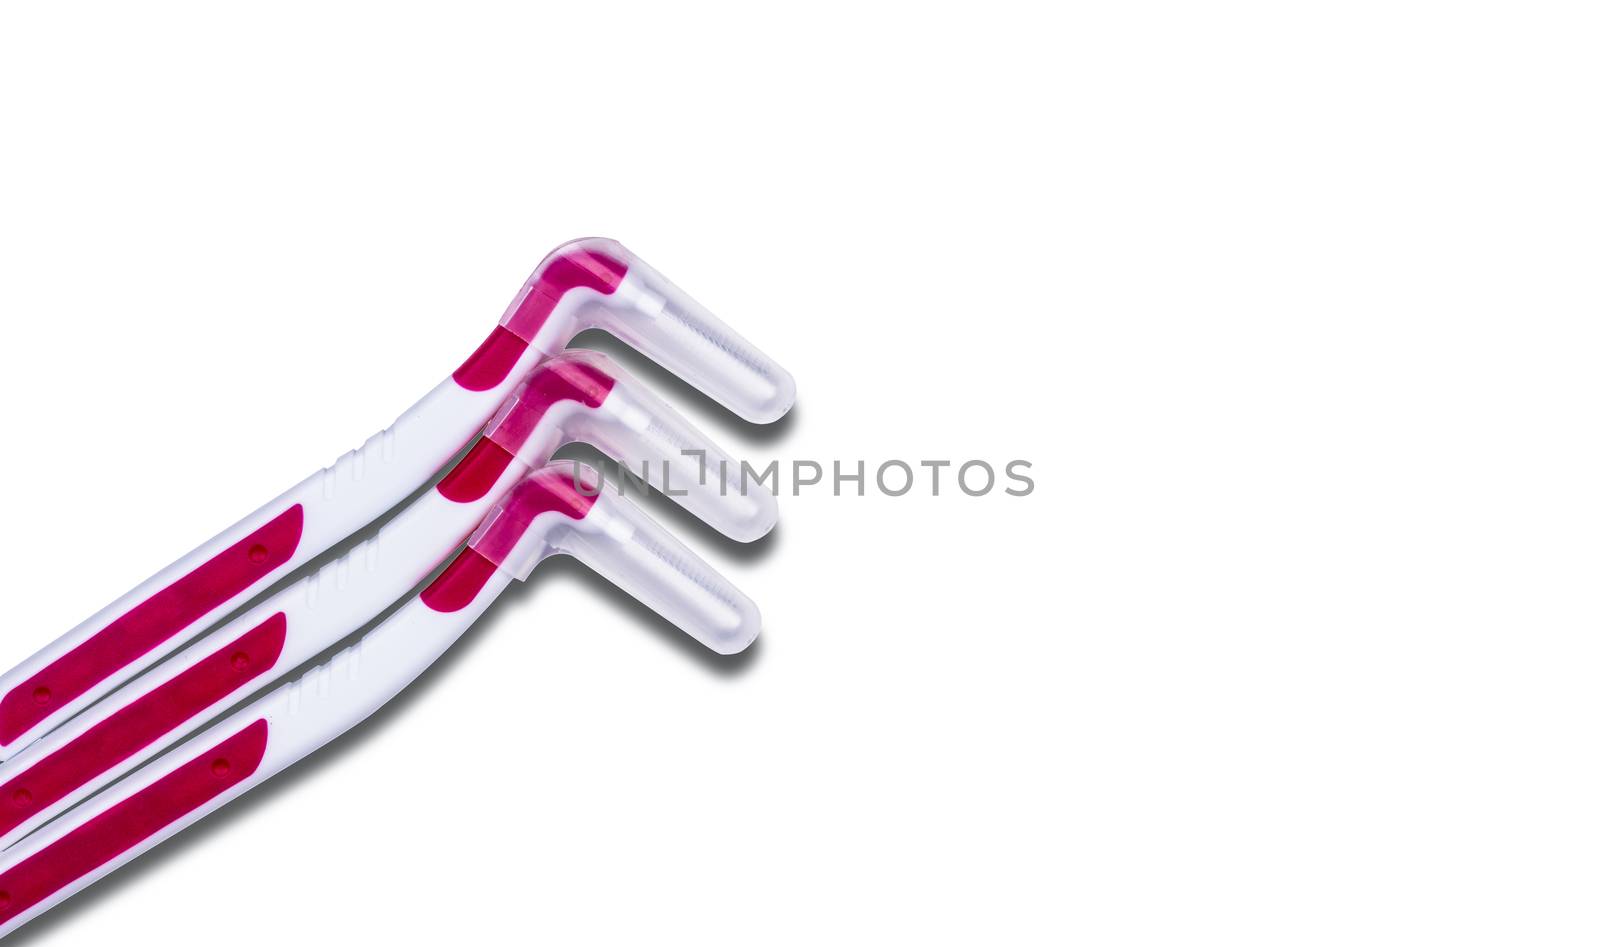 Three interdental brush with cover isolated on white background with copy space for text. Dental care concept. Equipment for get rid of food stuck in teeth by Fahroni